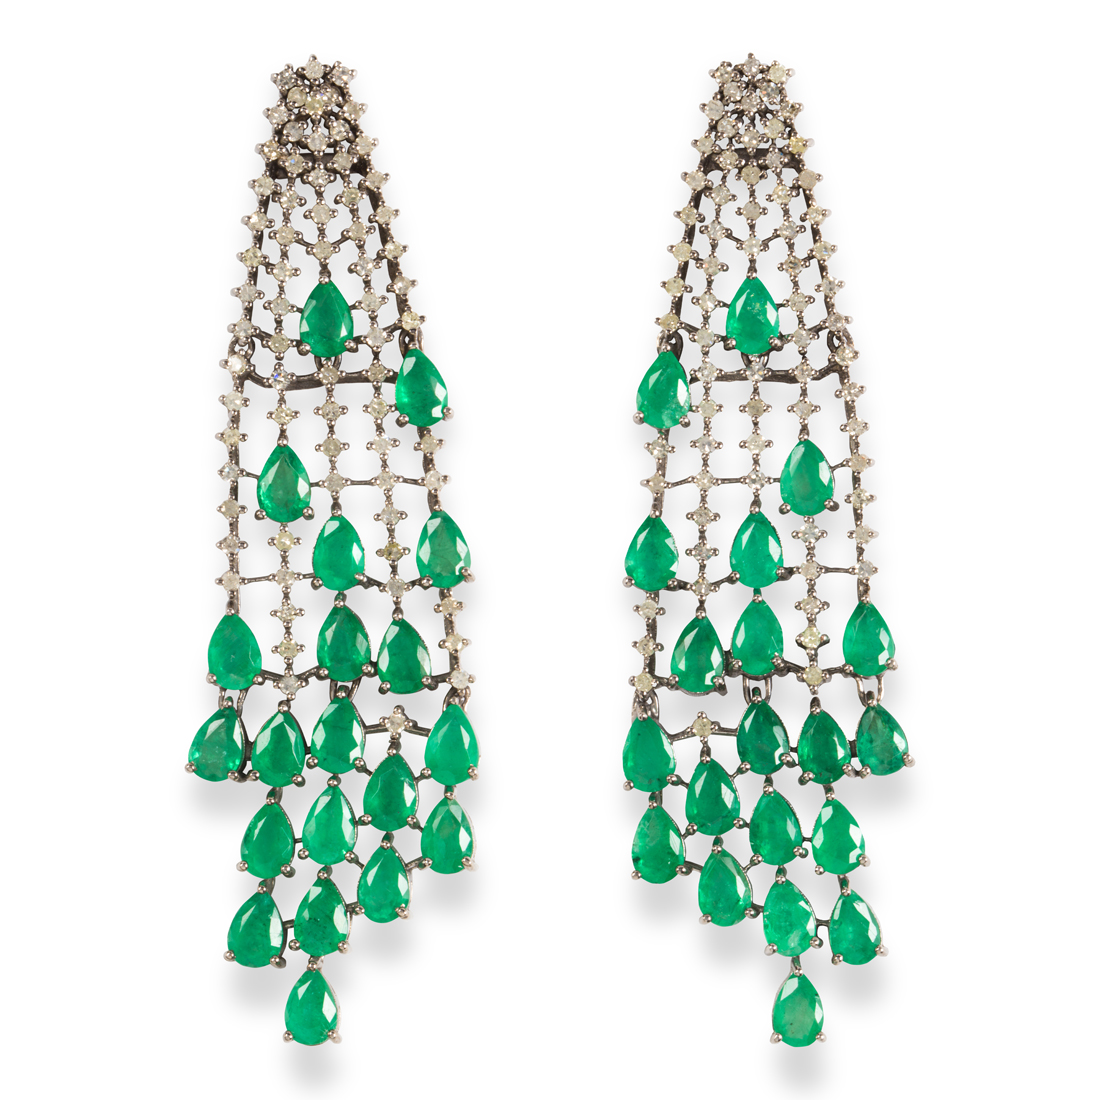 A PAIR OF EMERALD AND DIAMOND EARRINGS 3a1ff0